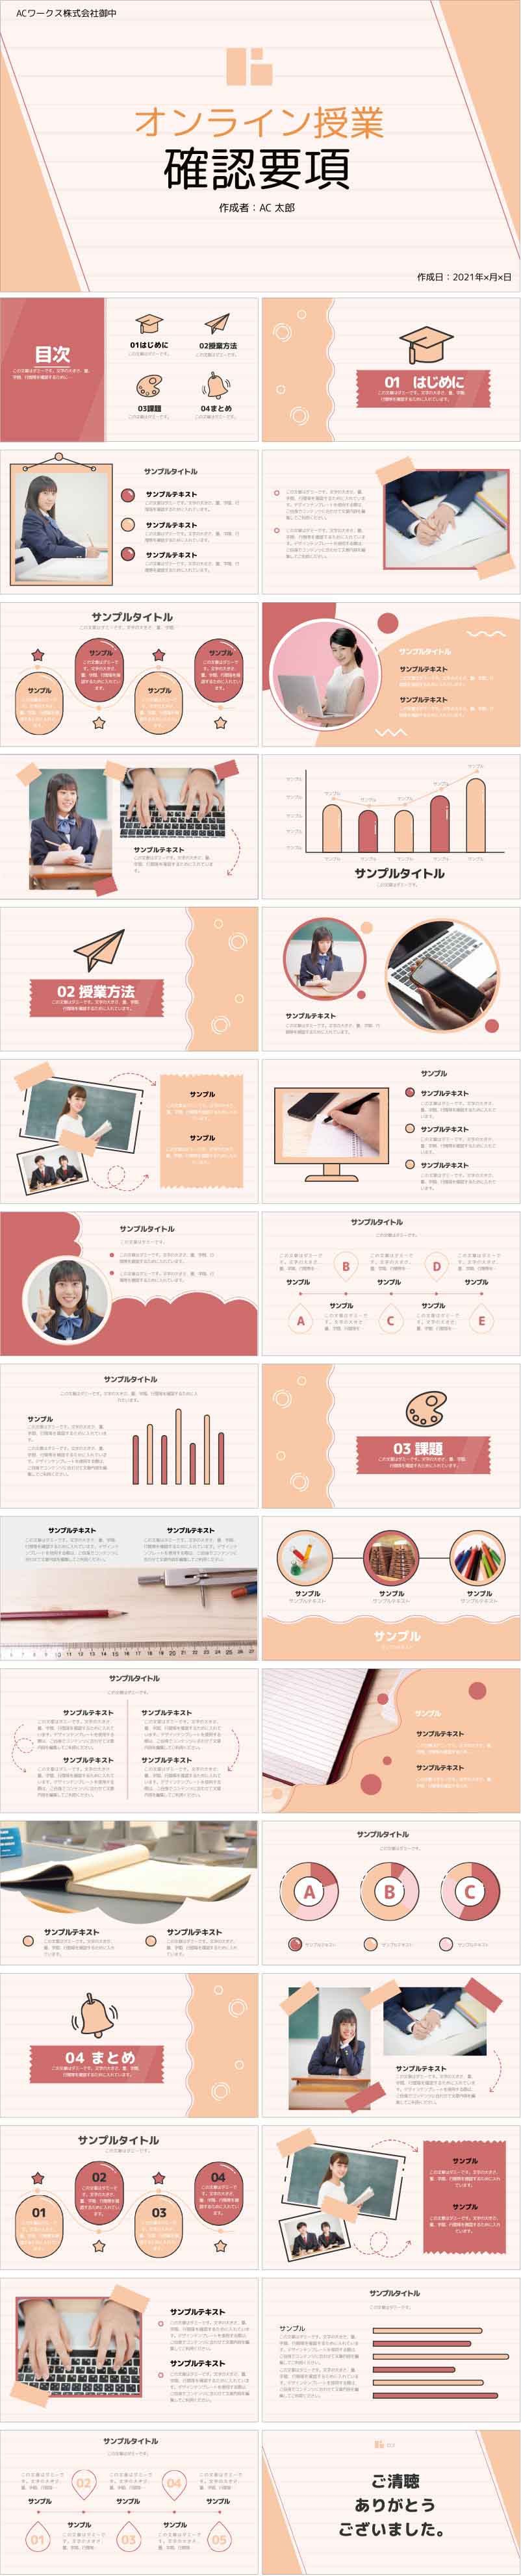 PowerPoint template vol.94